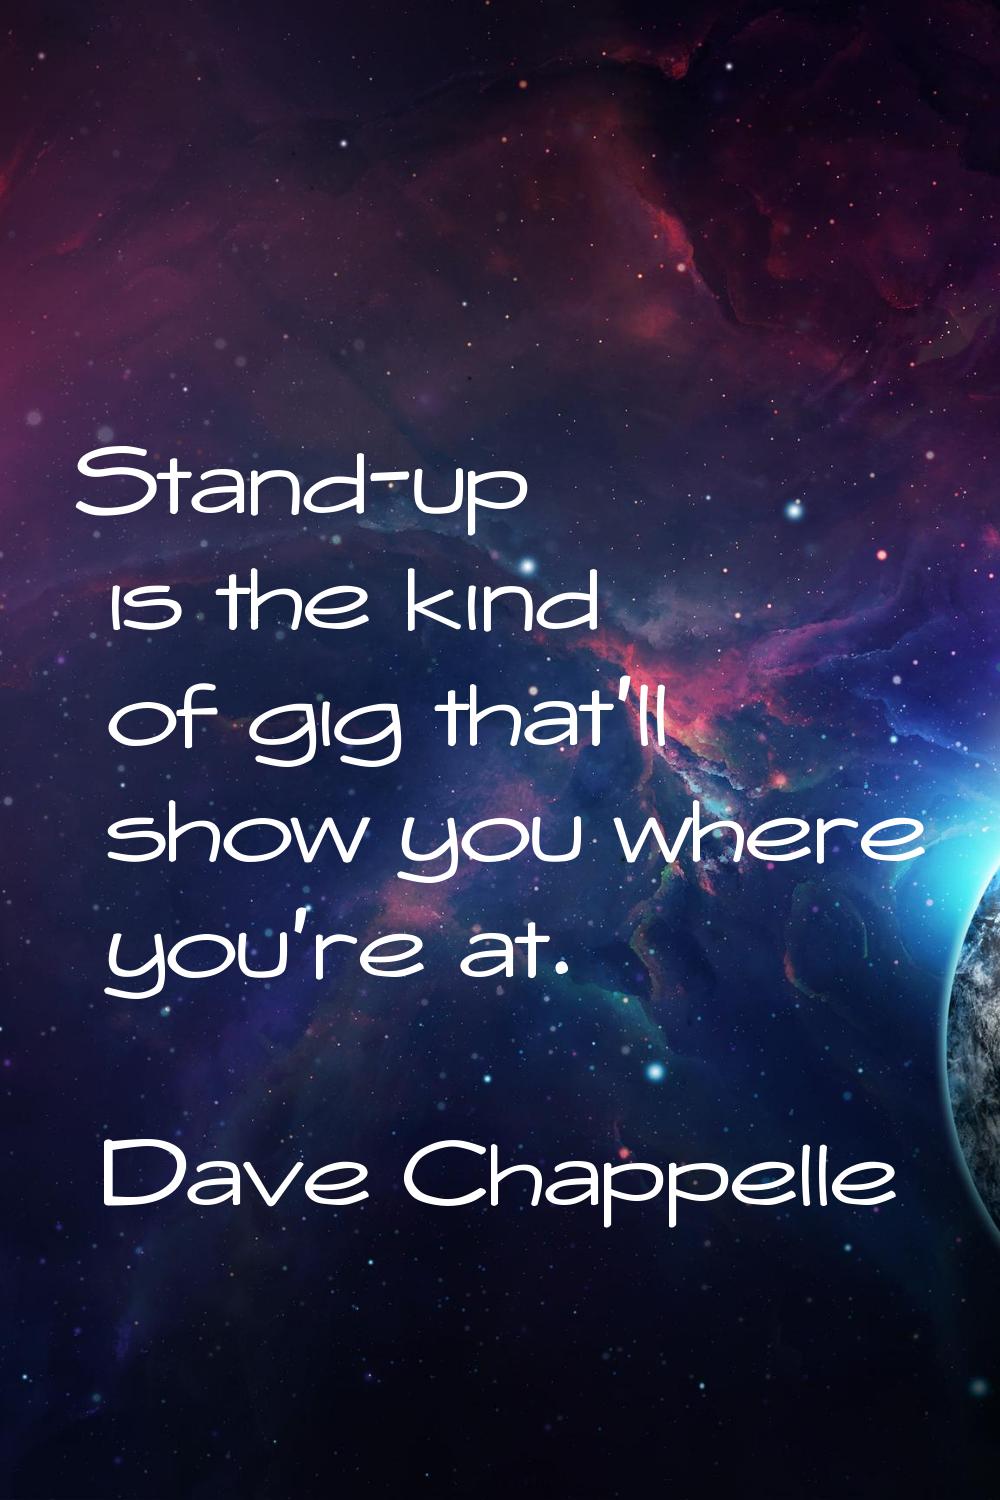 Stand-up is the kind of gig that'll show you where you're at.